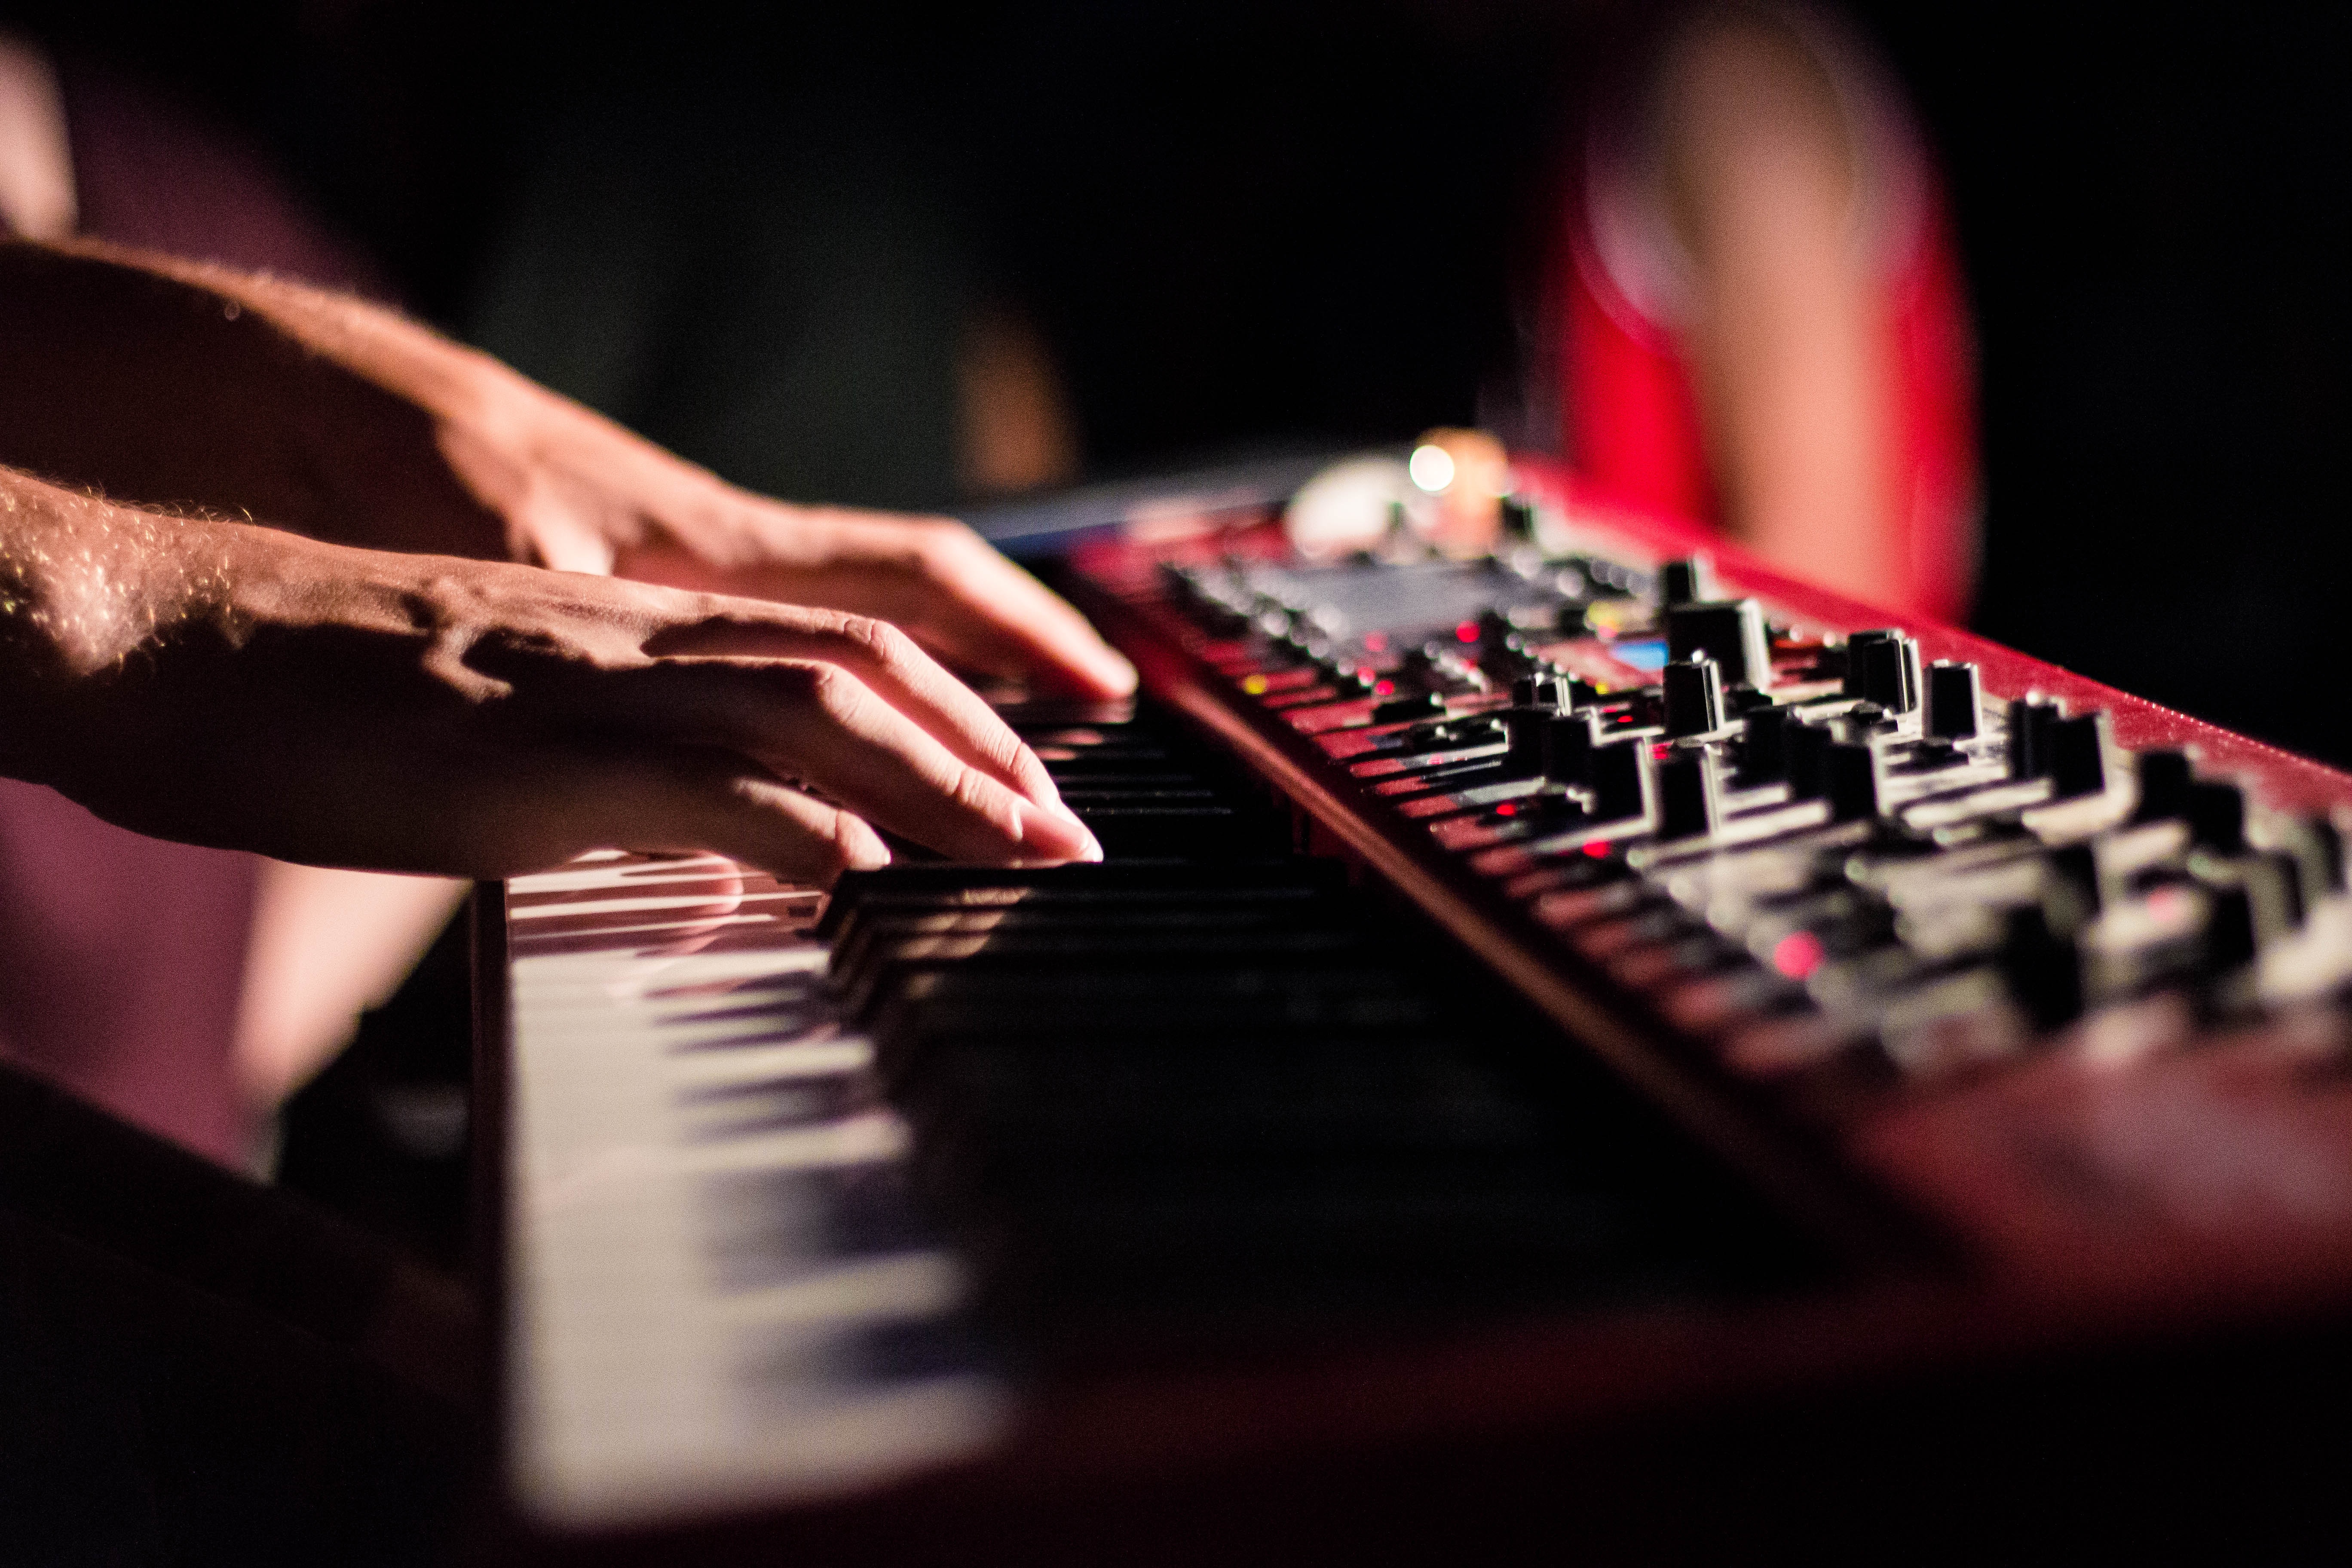 music, hands, musical instrument, synthesizer, keys, fingers